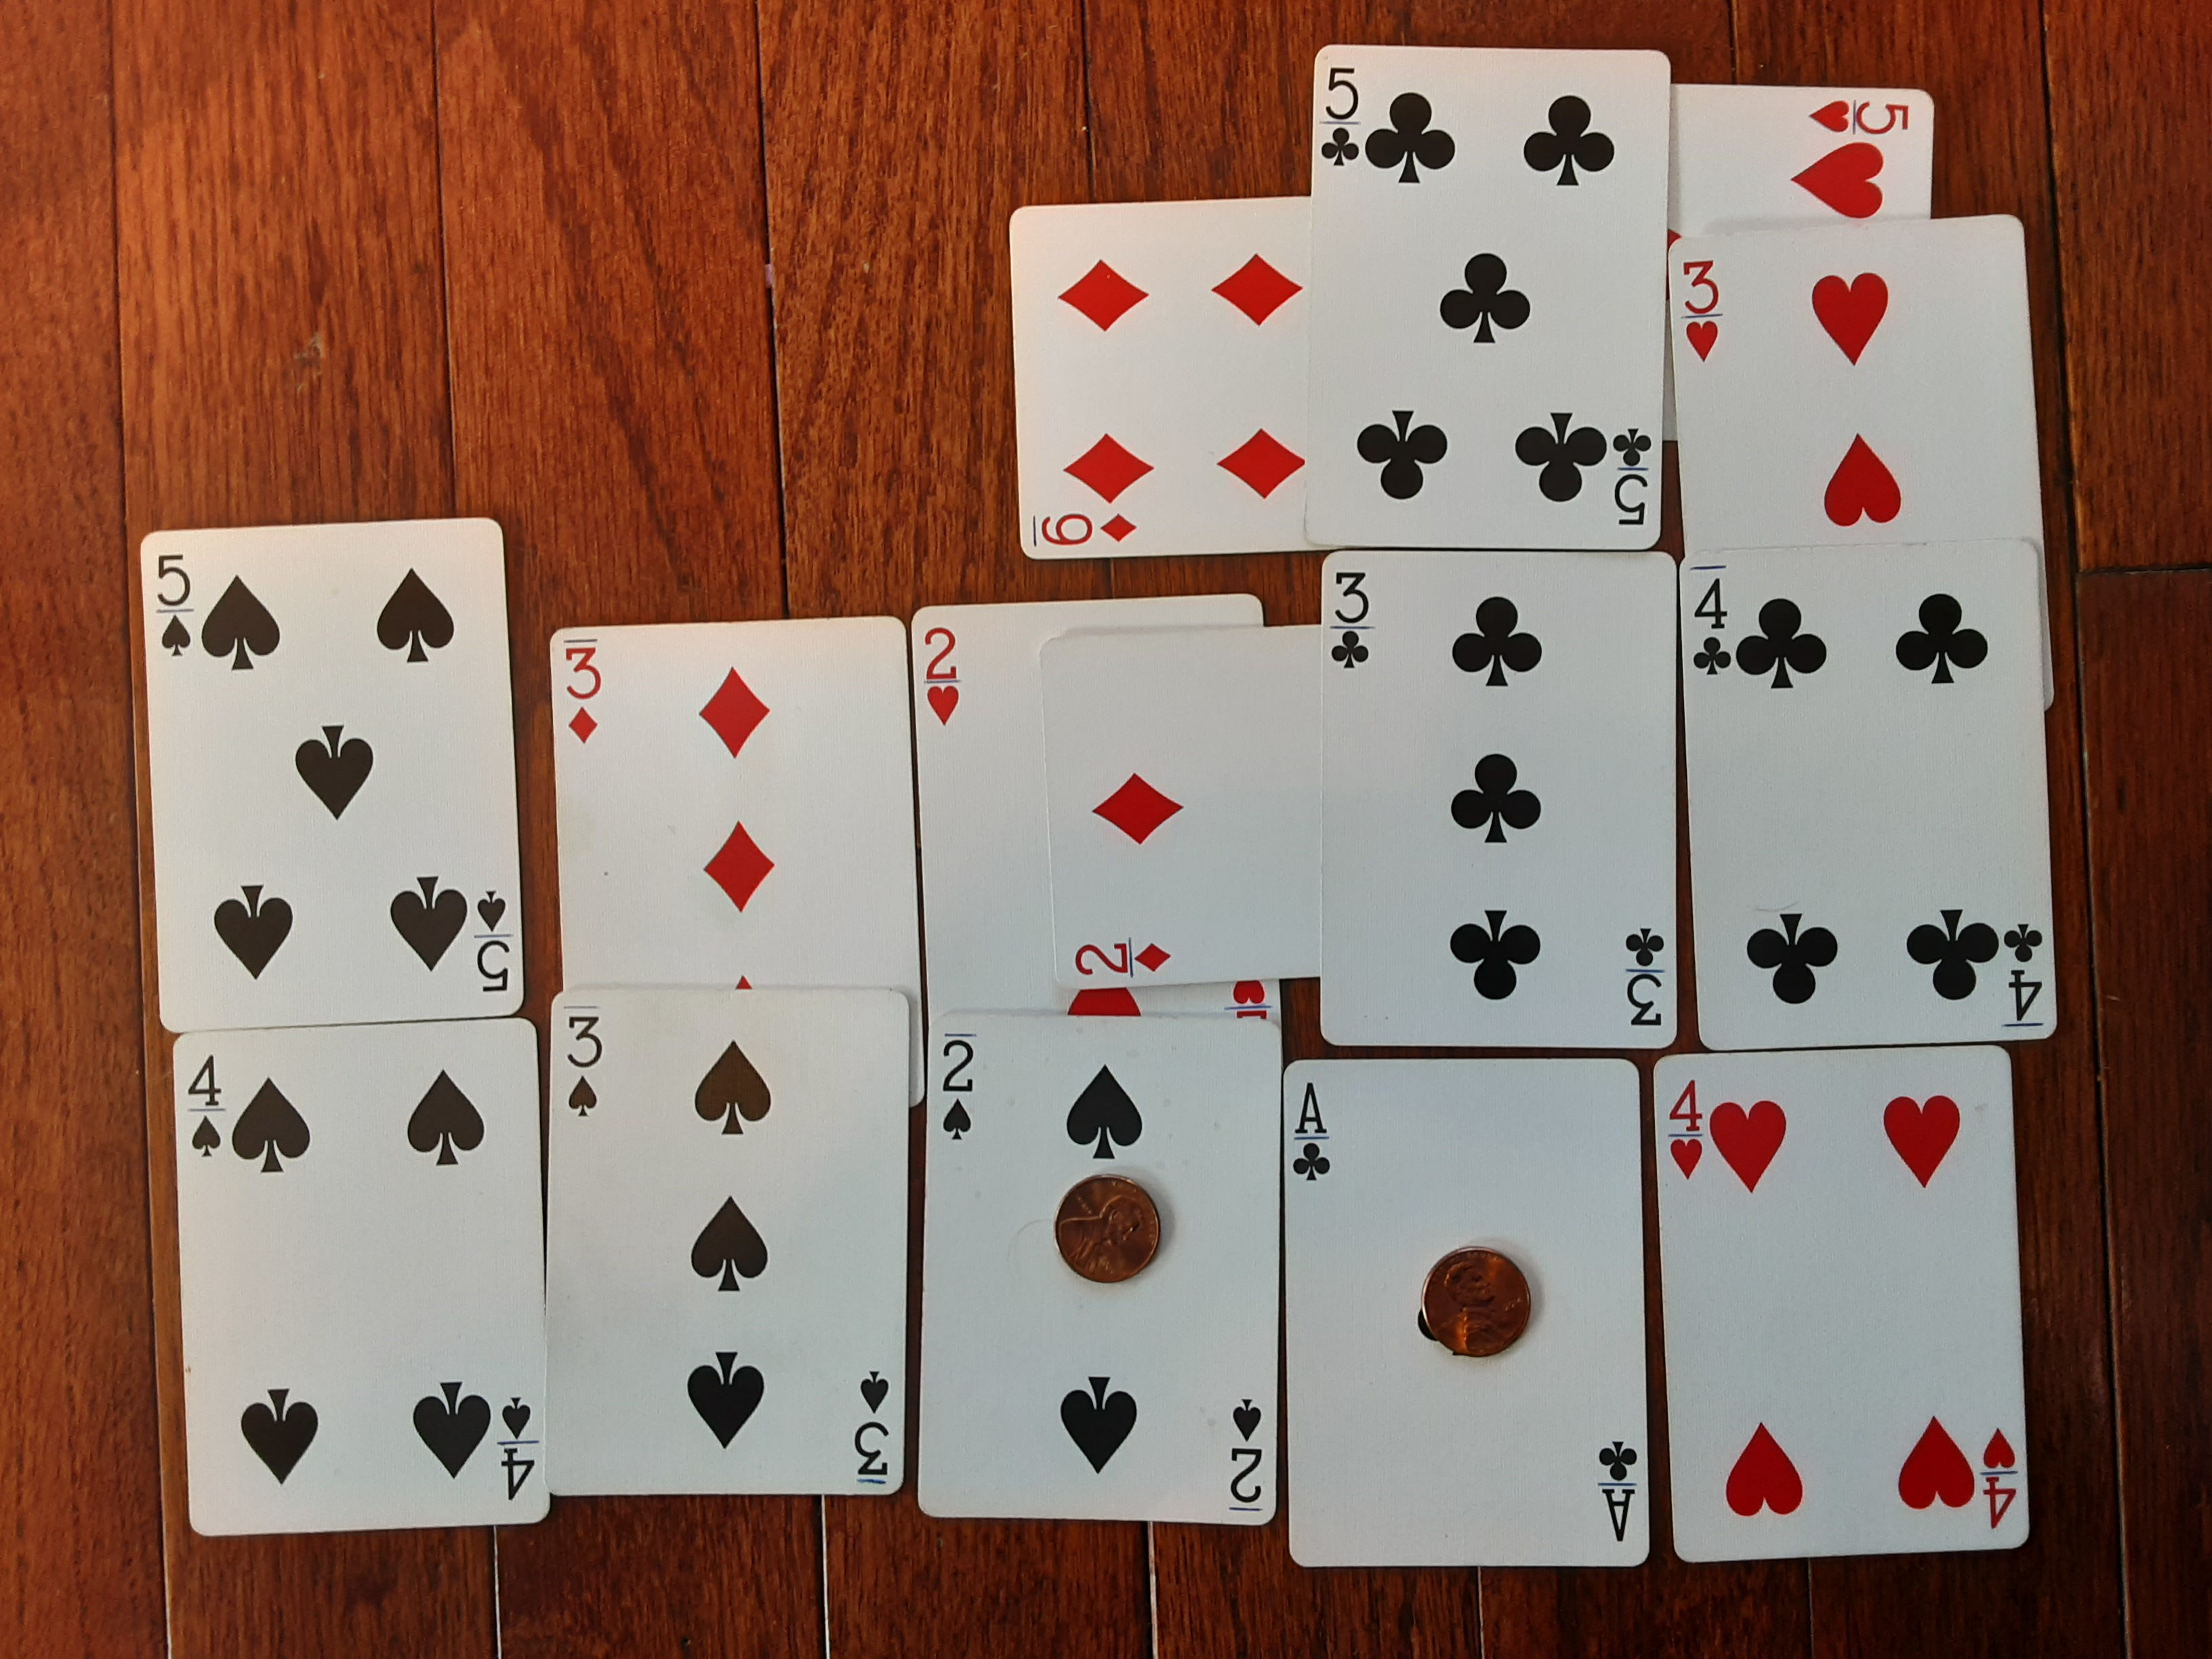 Figure 1: A player's network,  with several places to add new cards. Some
examples will be given below.